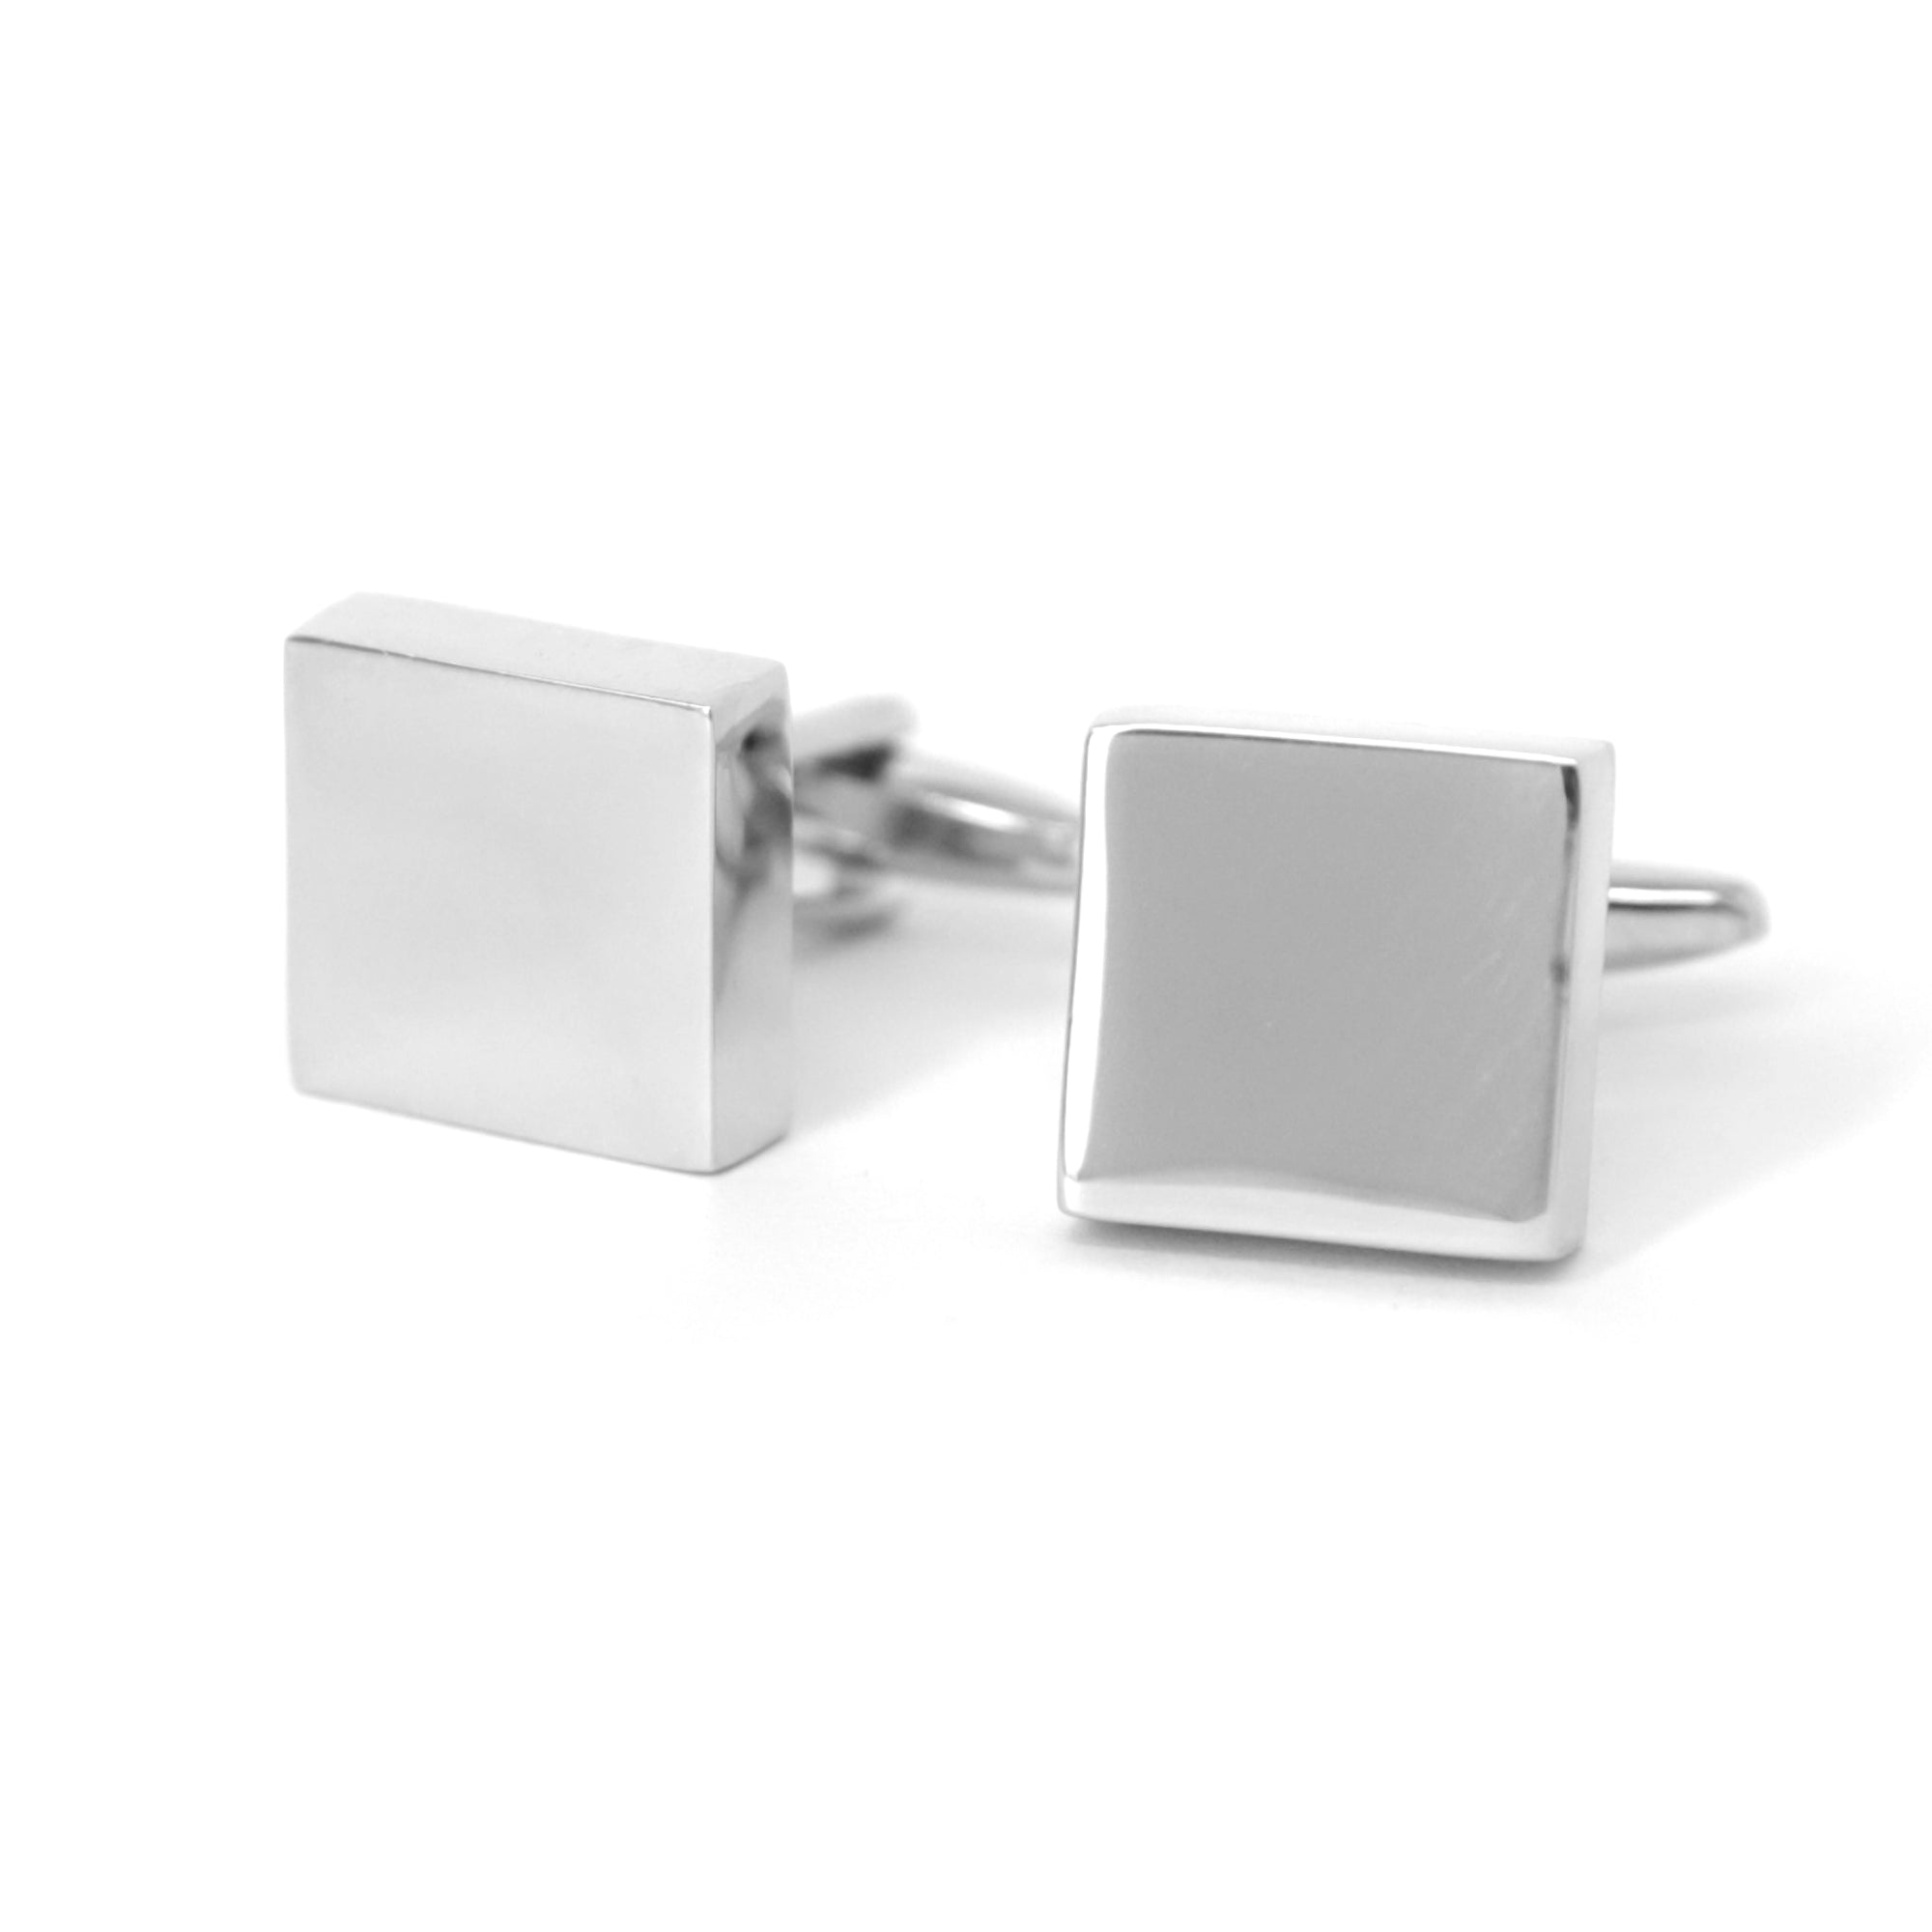 Classic Silver Squared mirror finishing  Cufflinks (Online Exclusive)